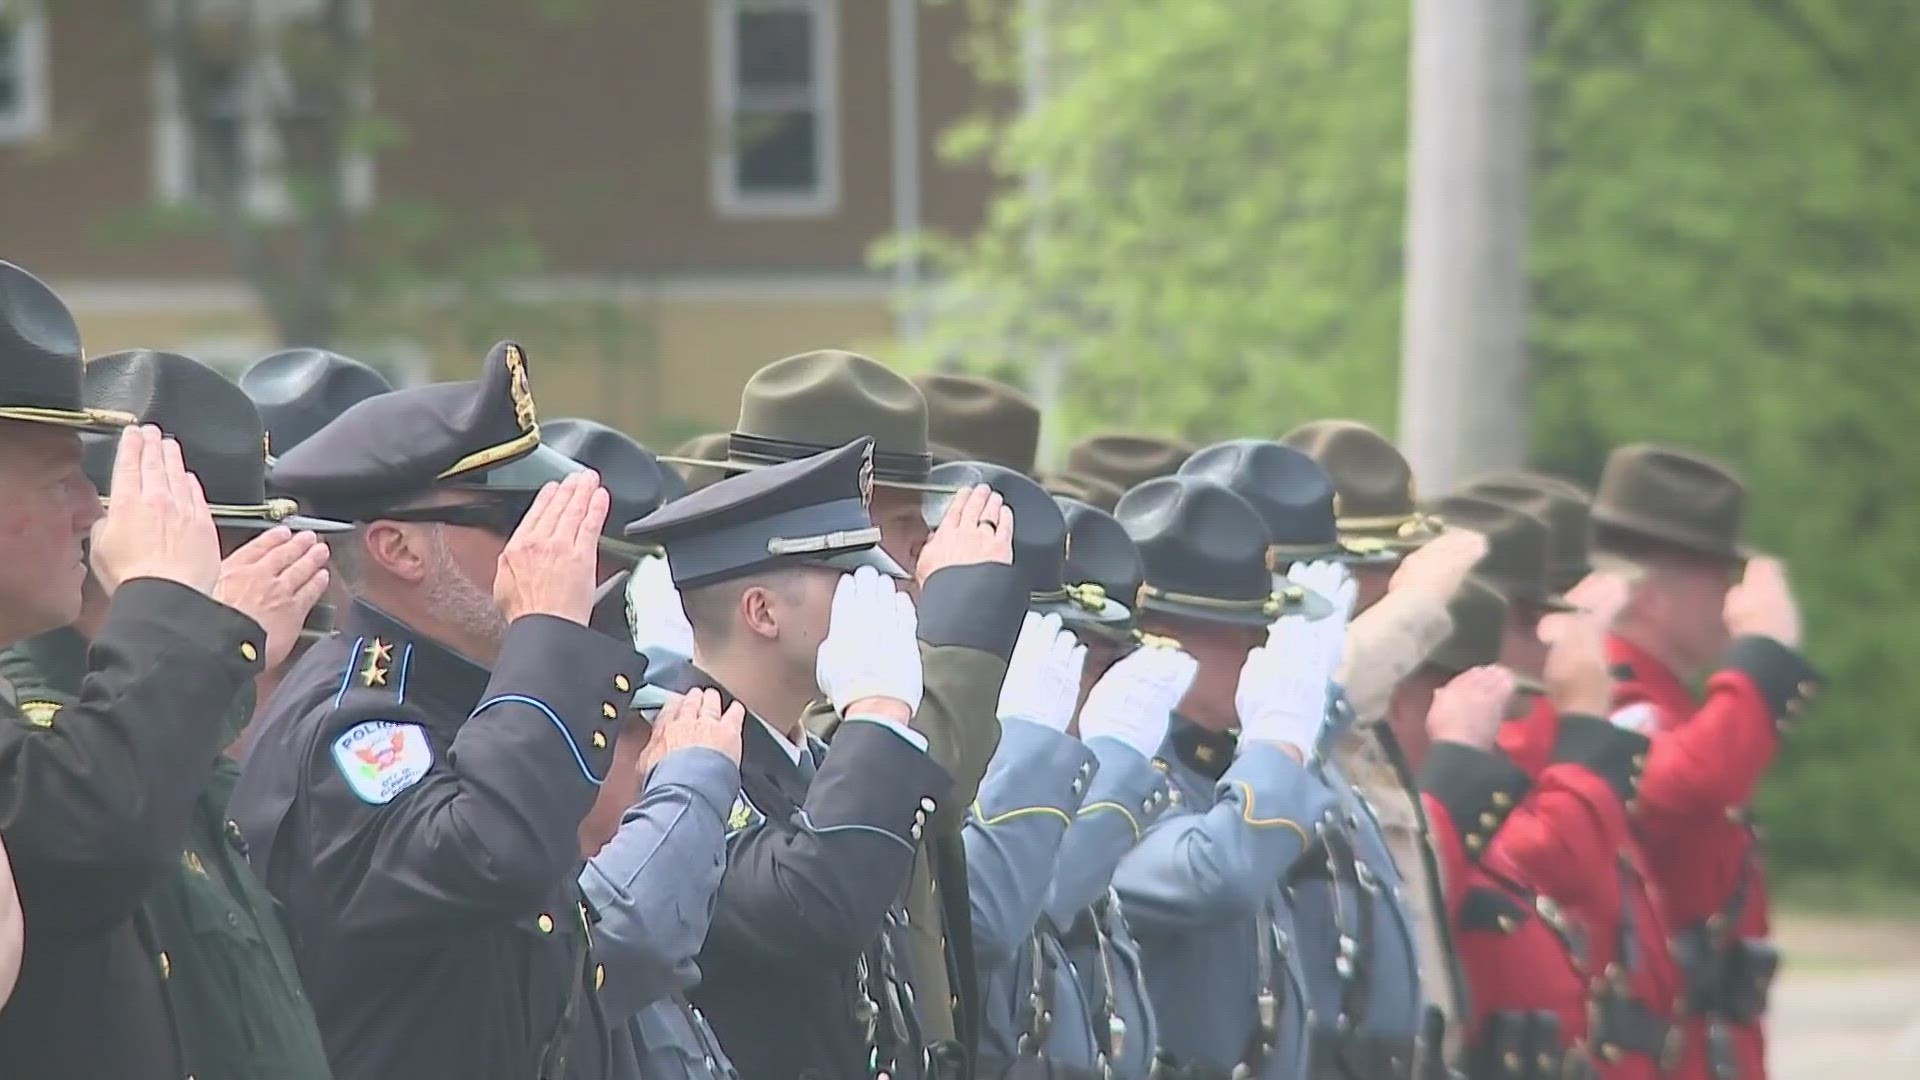 The annual observance was held Tuesday morning at the Maine Law Enforcement Officers Memorial on State Street near the State Capitol in Augusta.